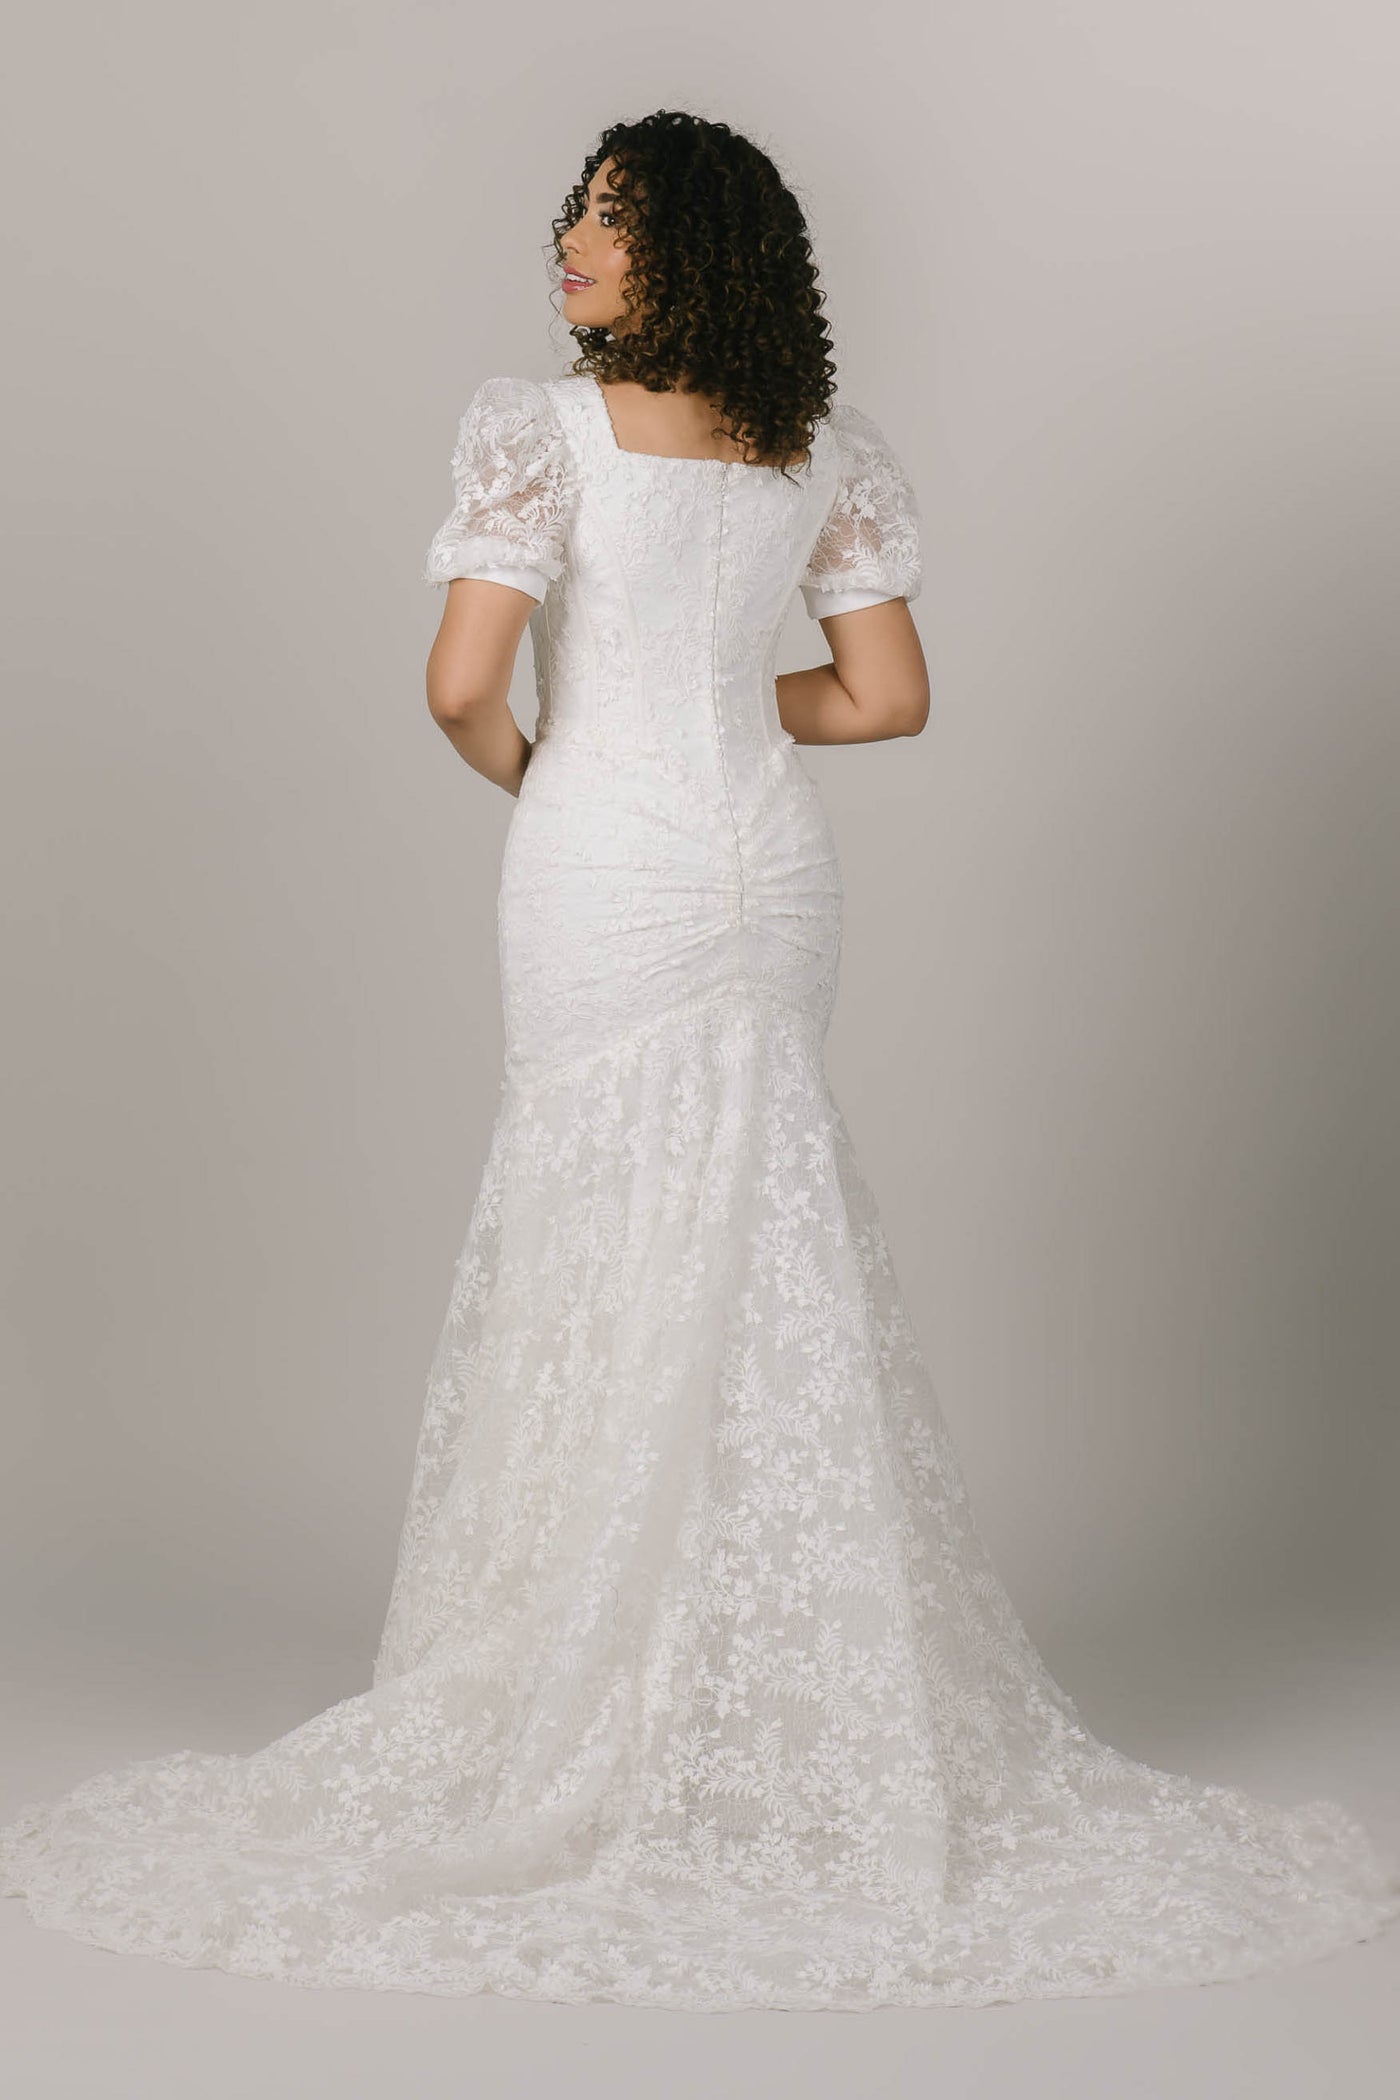 This is a back shot of a modest wedding dress with a mermaid silhouette and lacy long train.